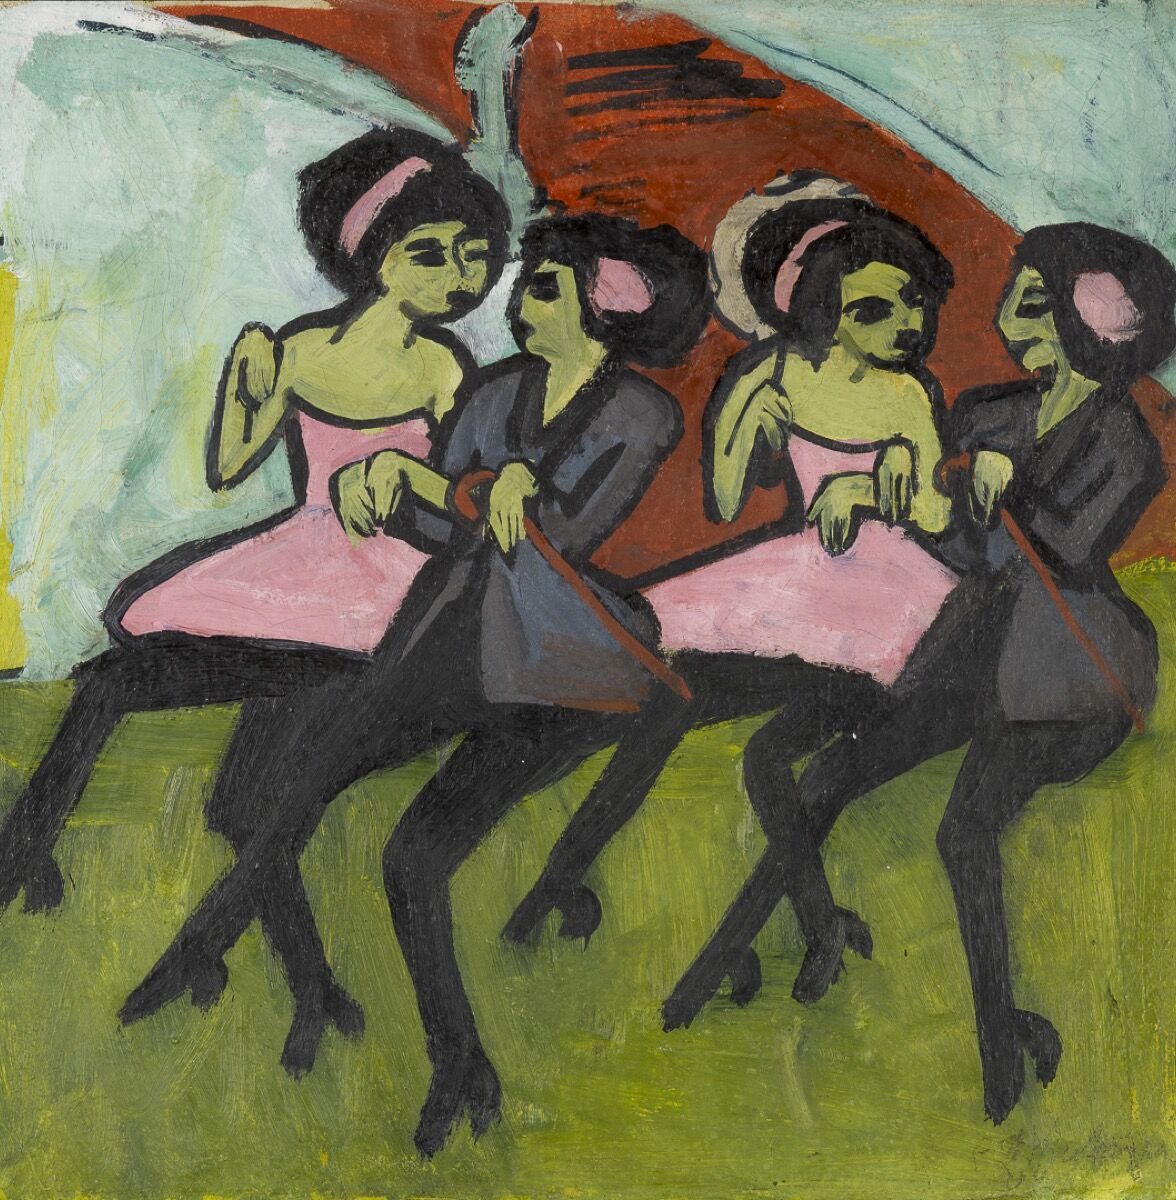 Ernst Ludwig Kirchner, Panama Dancers, 1910–11. Photo by Bridgeman Images. Courtesy of the North Carolina Museum of Art, Raleigh.